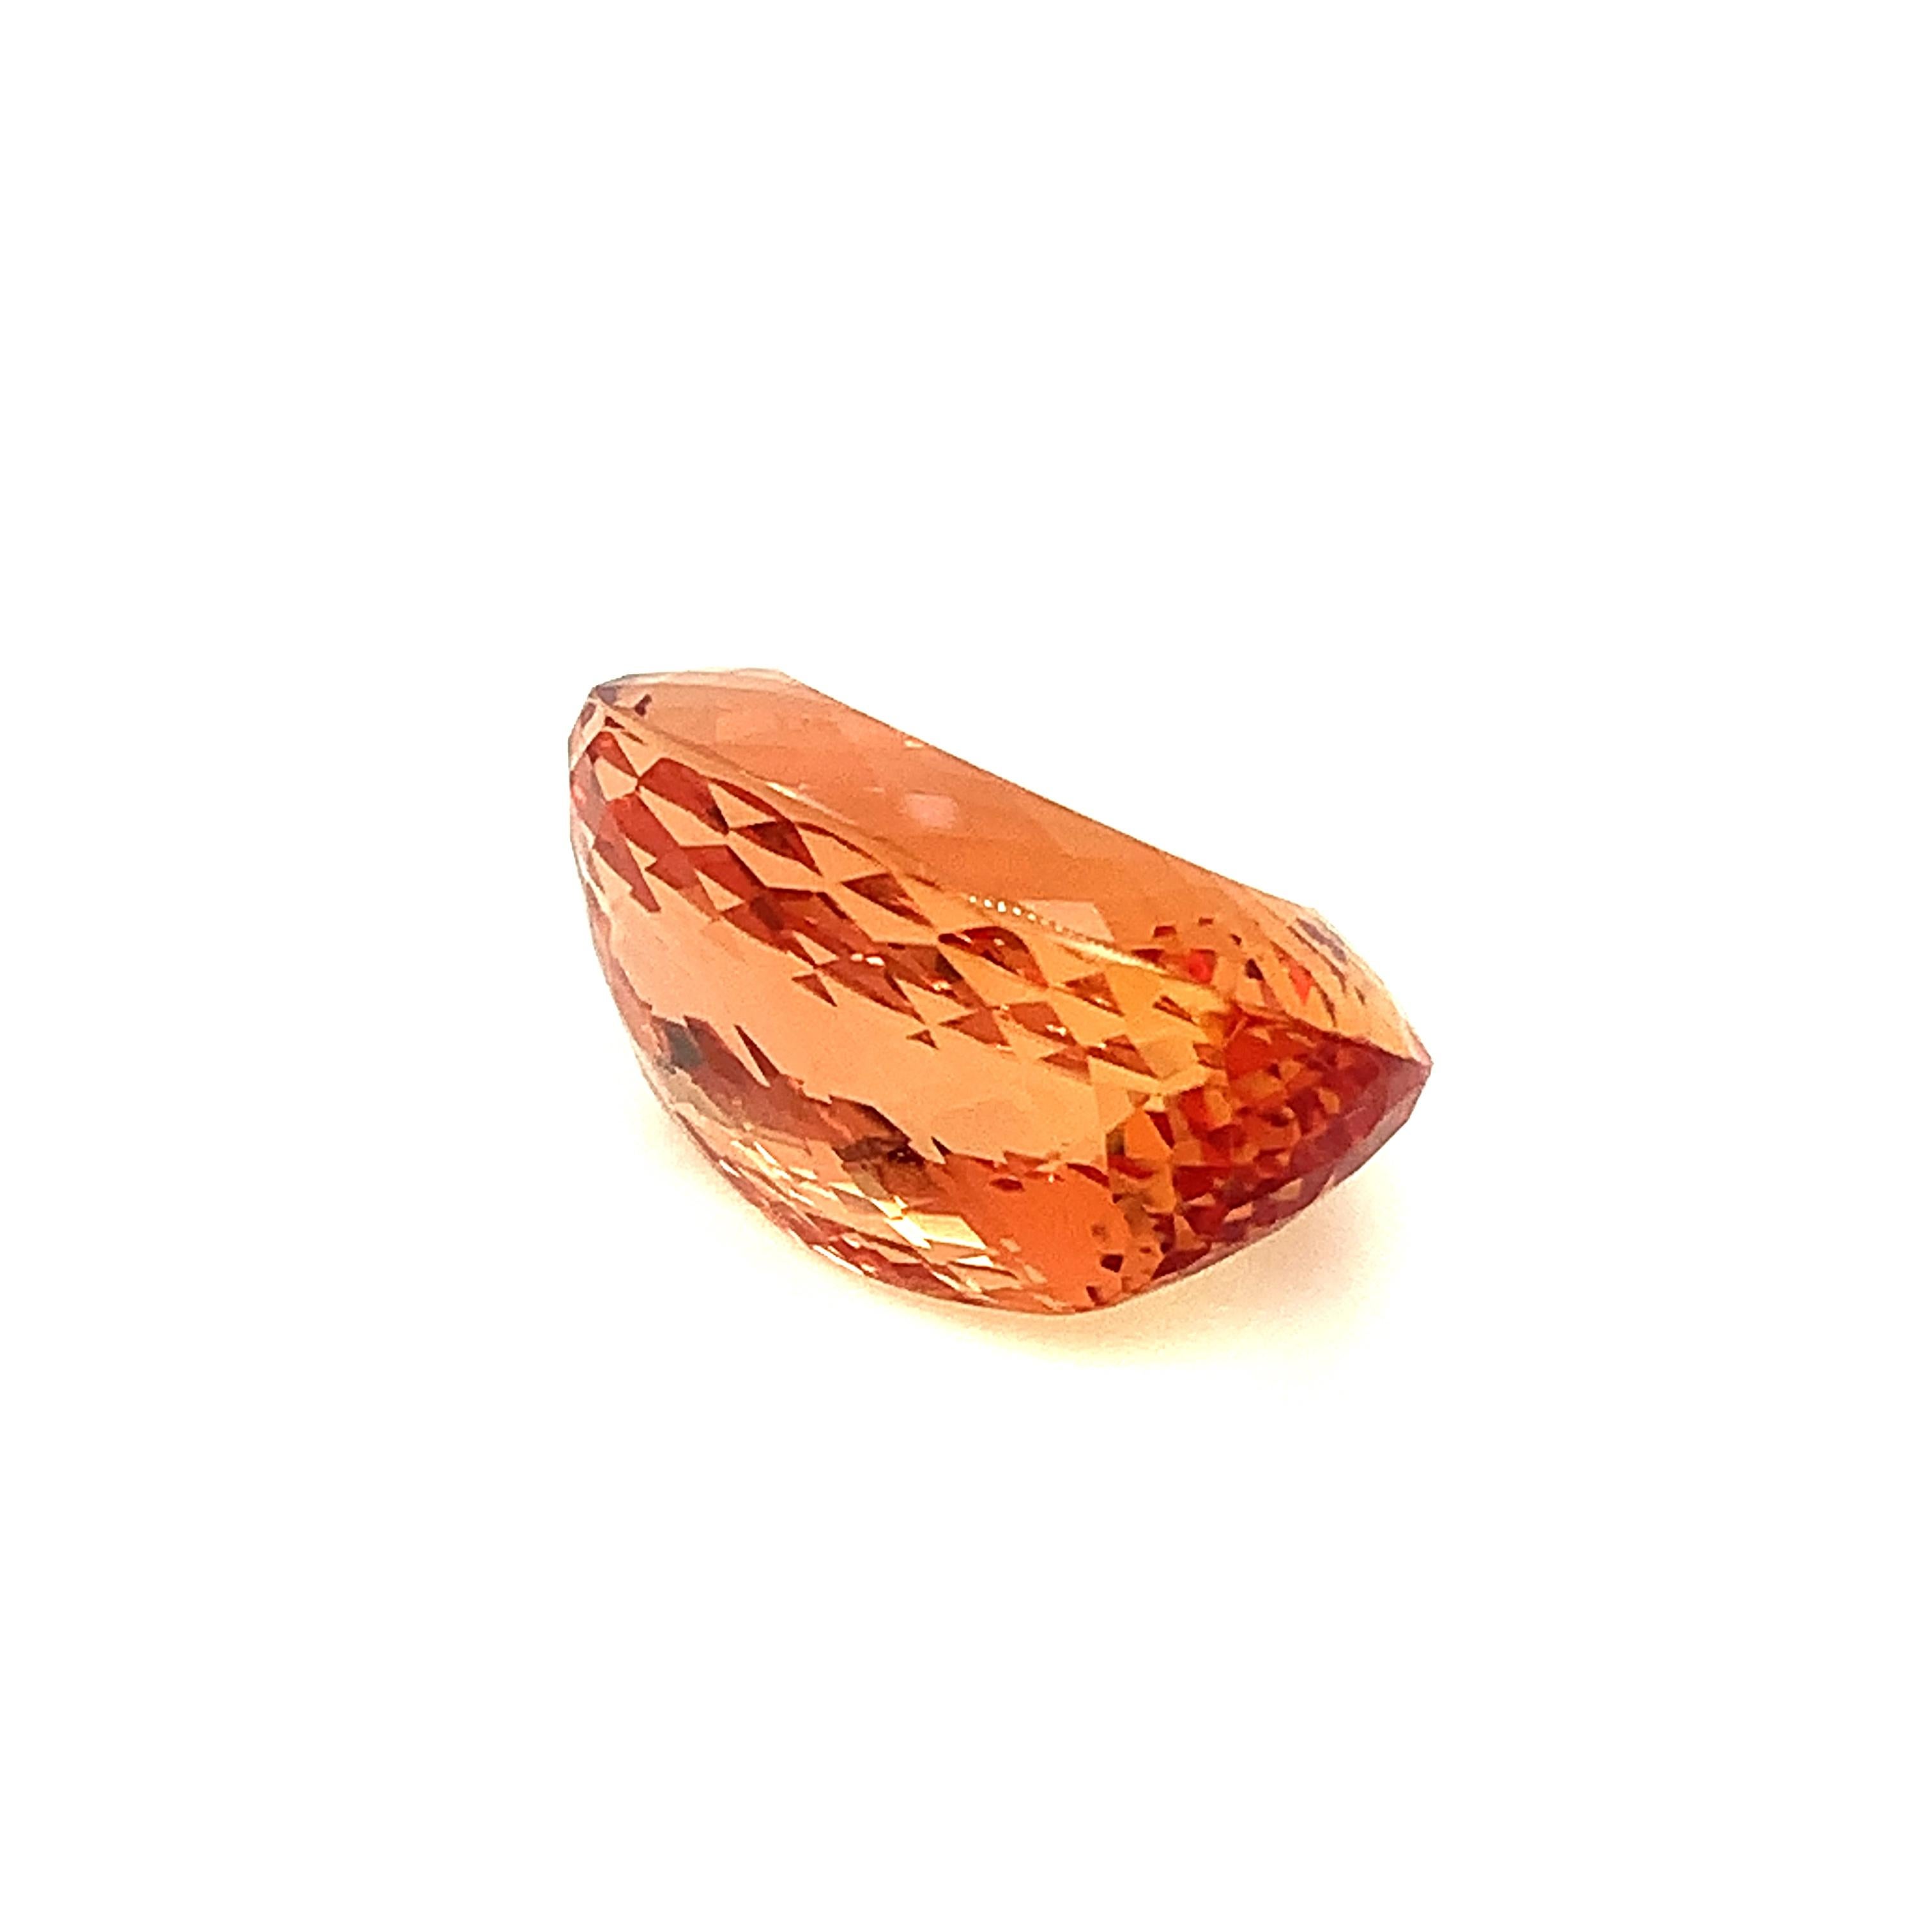 33.95 Carat Imperial Topaz Cushion, Unset Loose Gemstone, GIA Certified For Sale 2